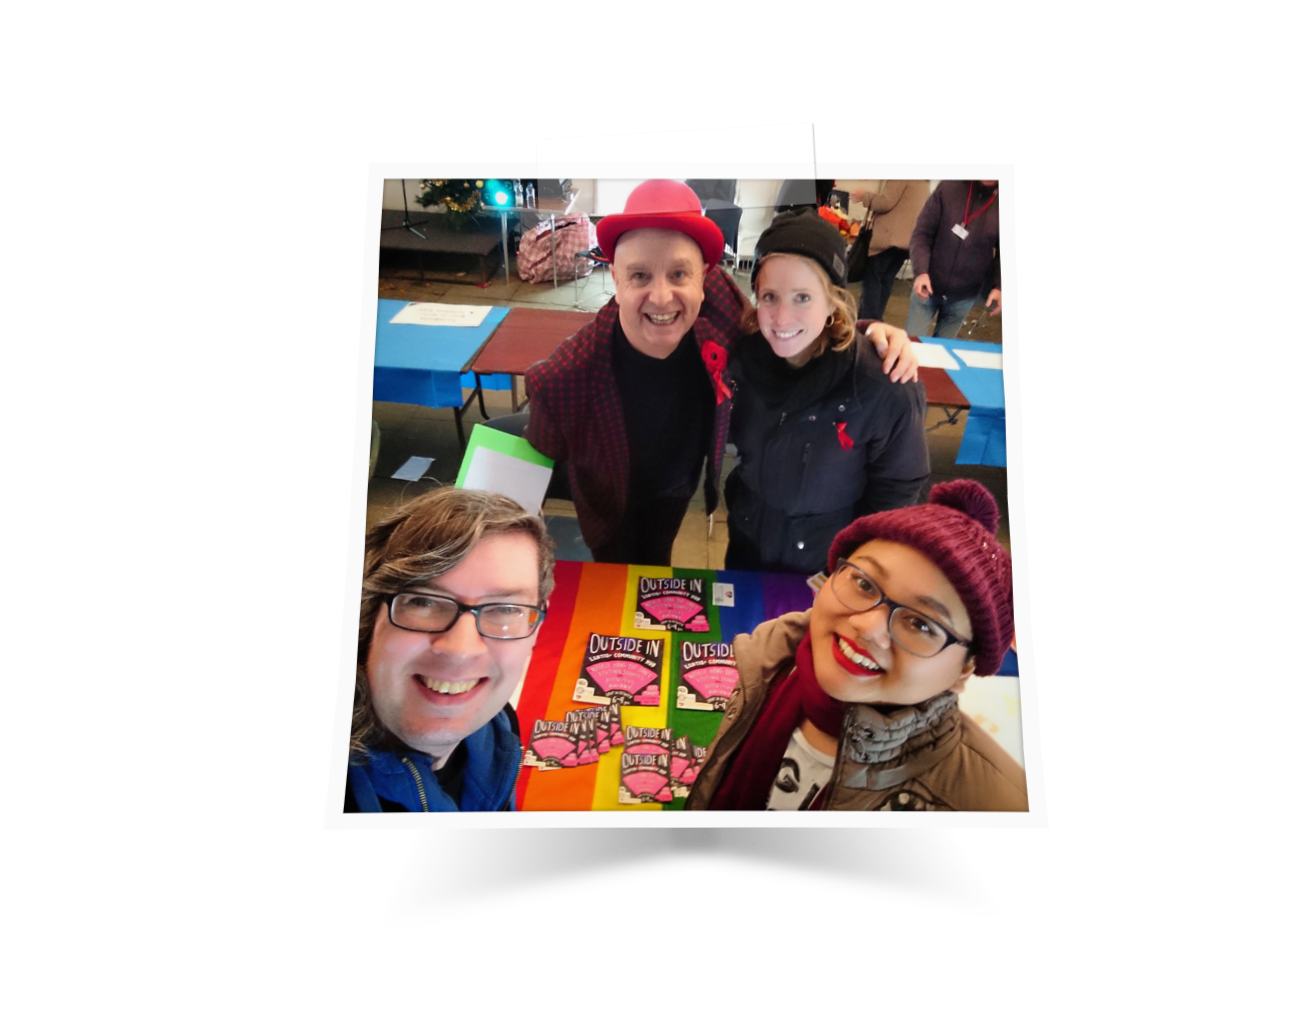 people from the campaign team at Camden Winterfest 2019, run by our friends Castlehaven Community Association